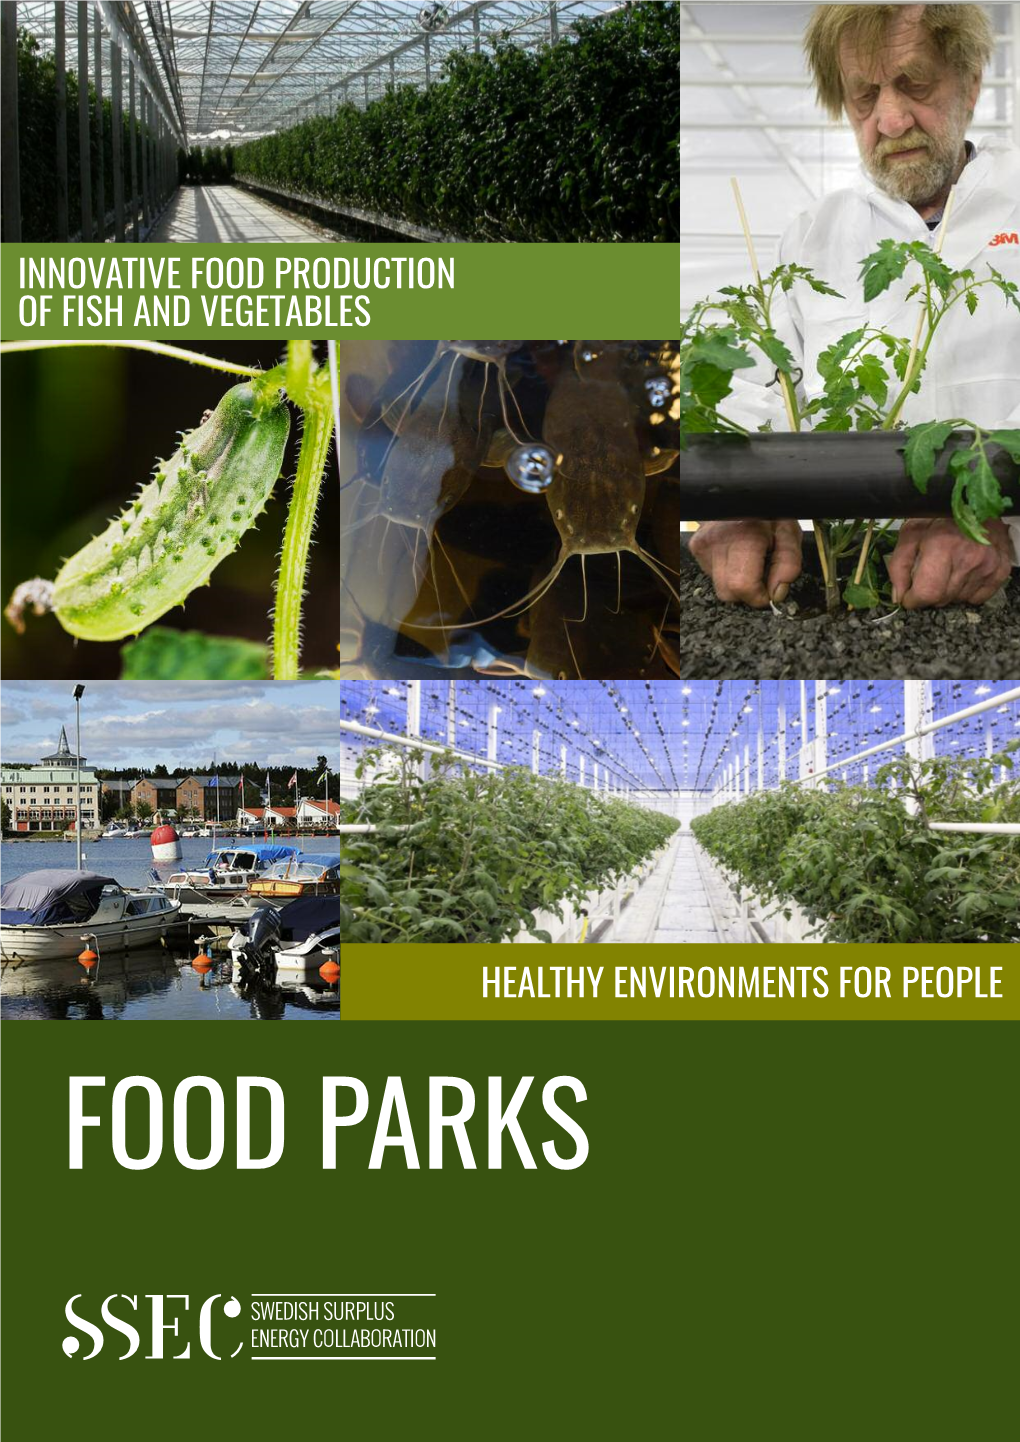 FOOD PARKS Program Leader of Urban Food and Editor of This Ebook